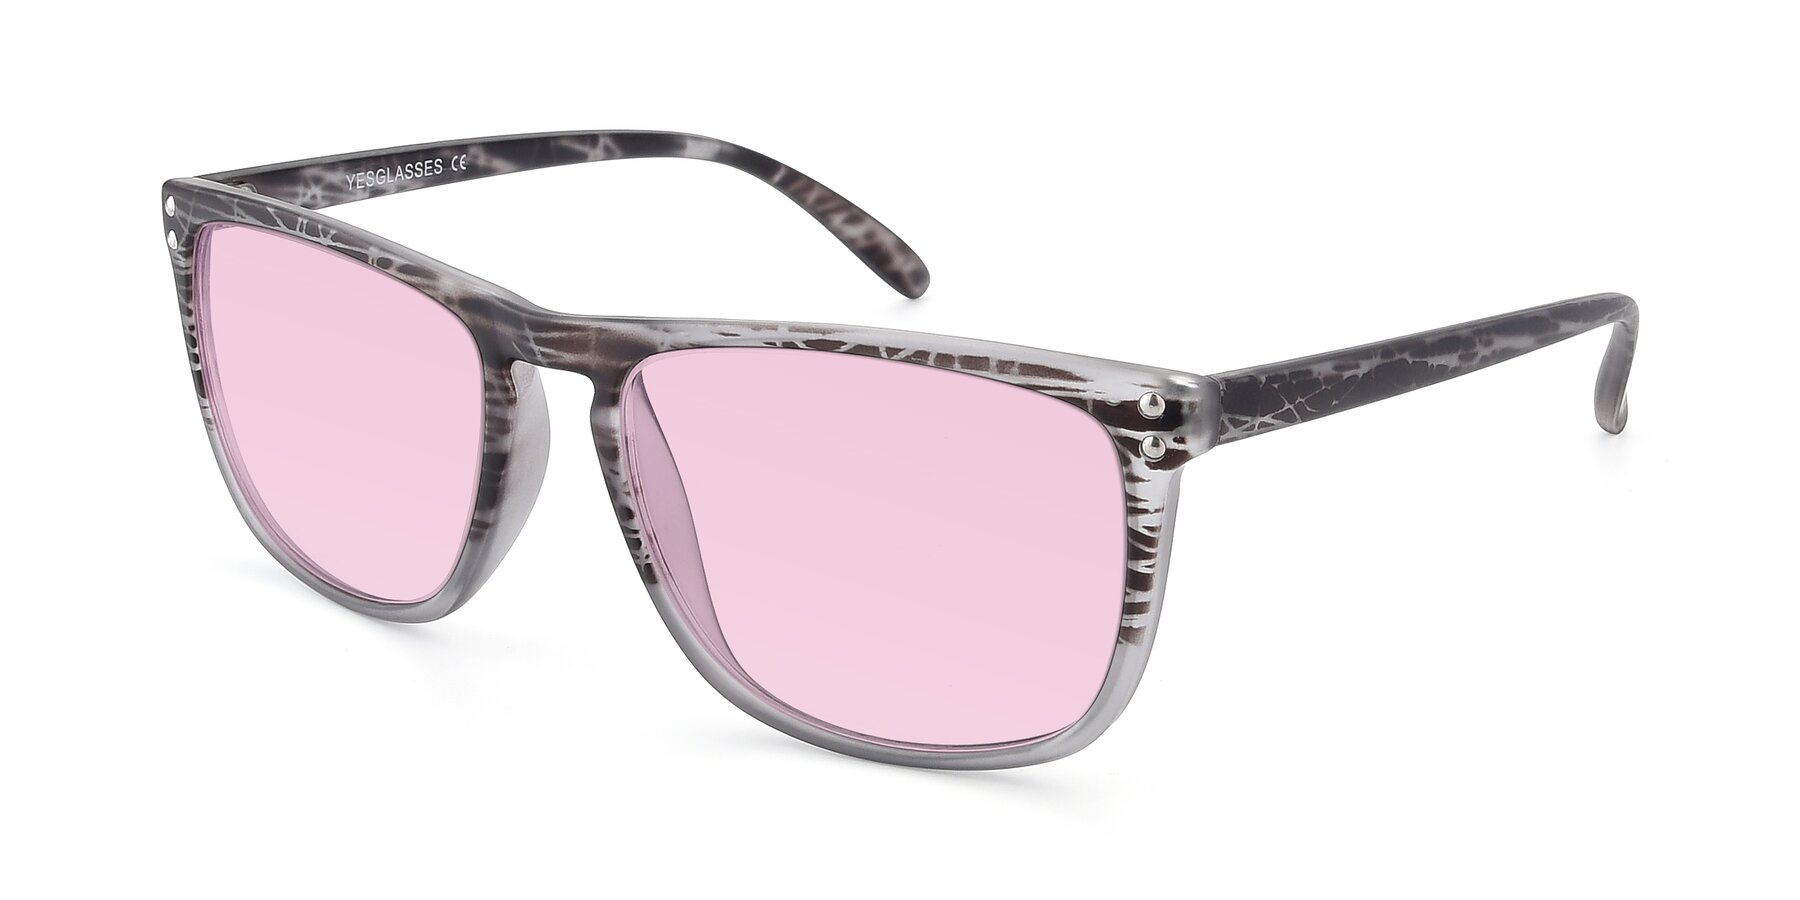 Angle of SSR411 in Translucent Floral Grey with Light Pink Tinted Lenses